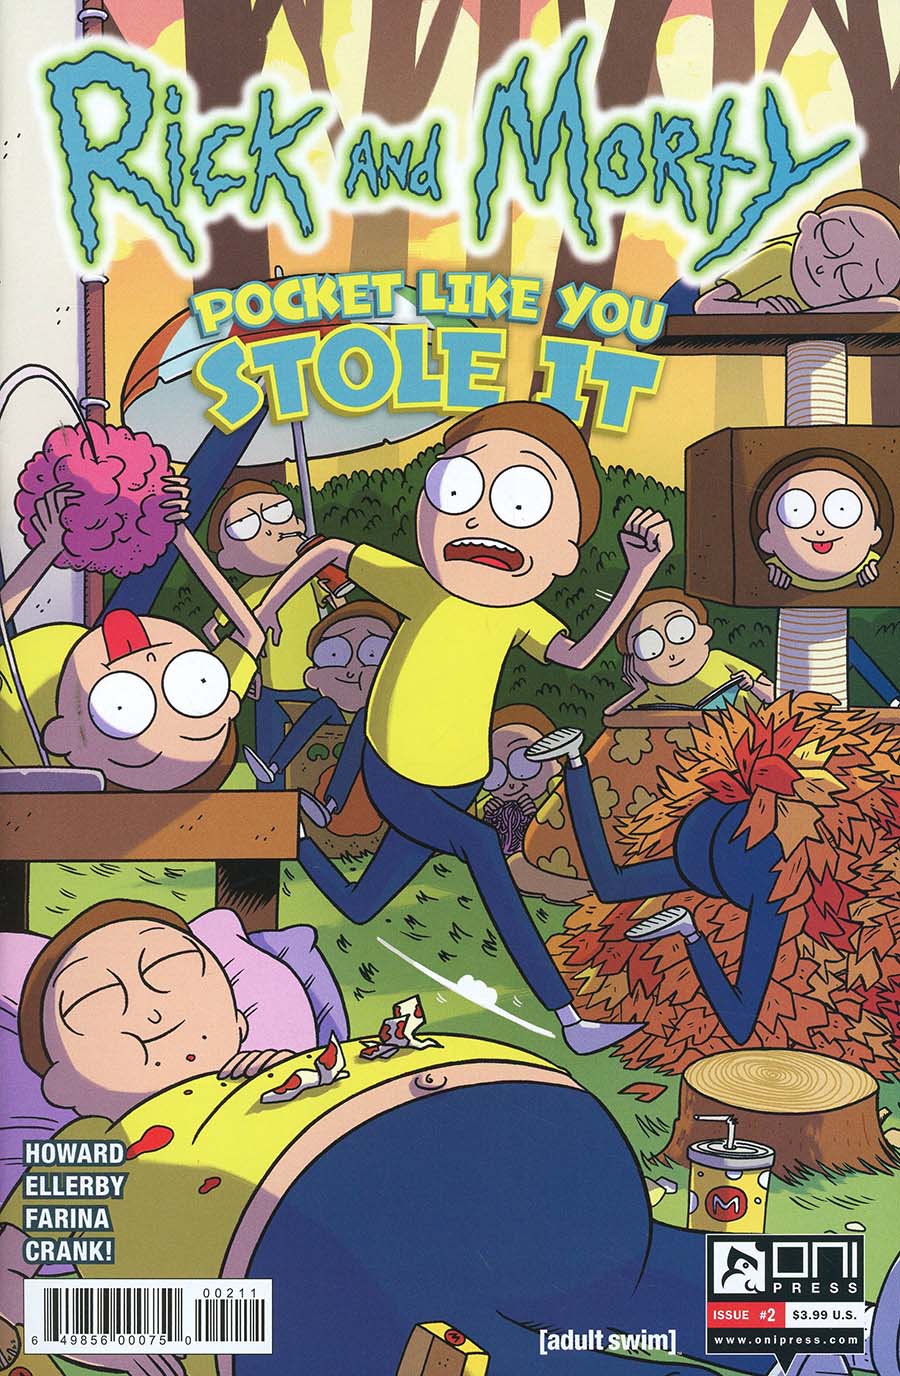 Rick And Morty Pocket Like You Stole It #2 Cover A Regular Katy Farina Cover